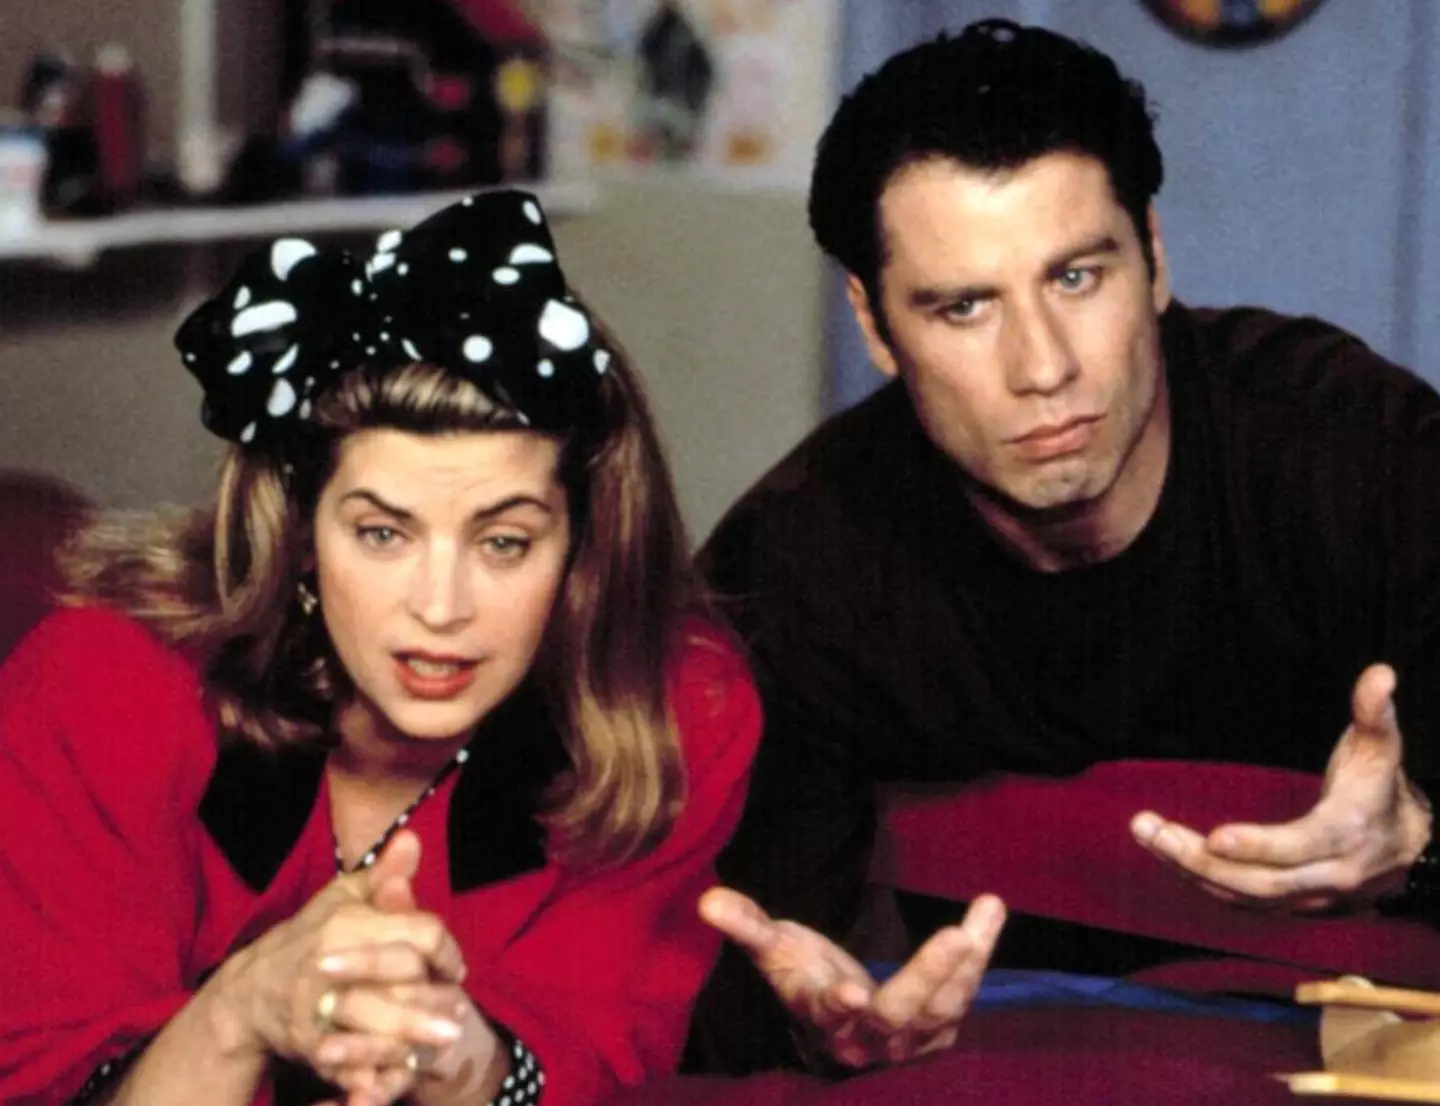 Kirstie Alley and John Travolta in Look Who's Talking.